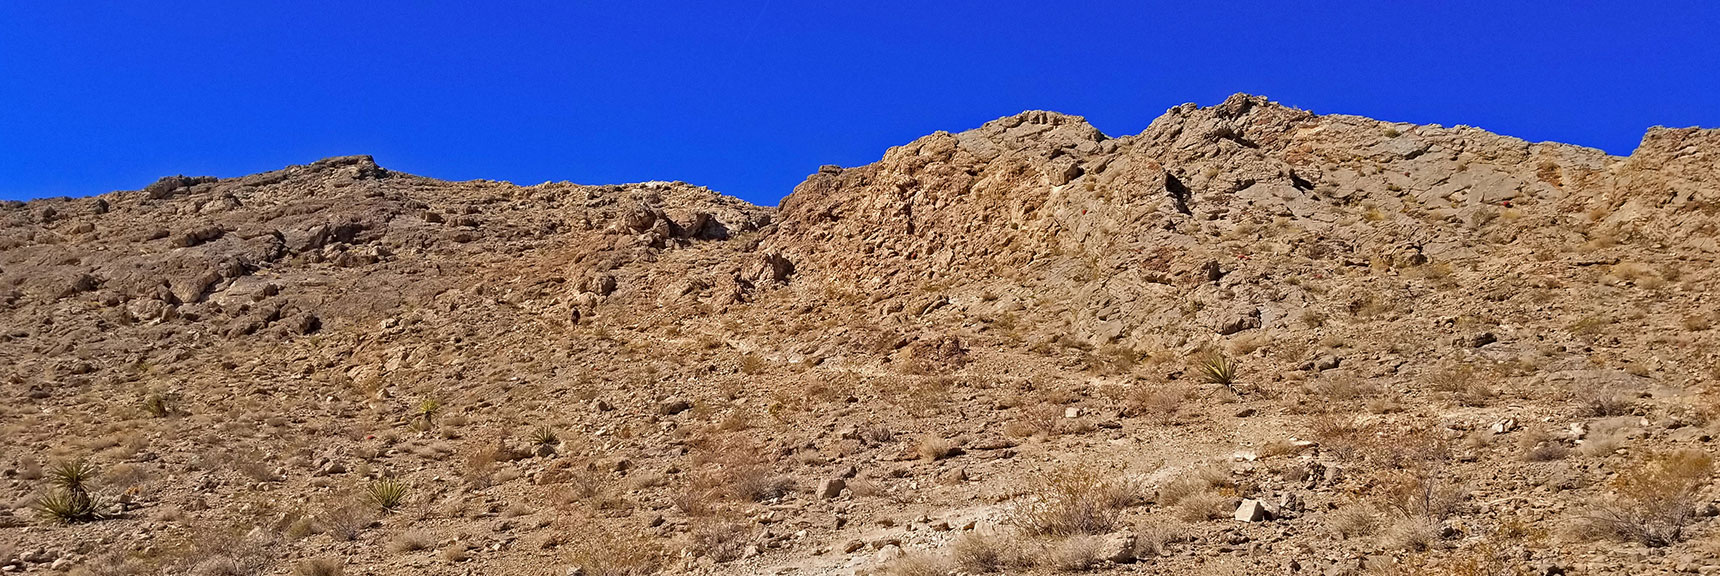 Rugged Summit Route on the Northern Side of Lone Mountain. | Lone Mountain | Las Vegas, Nevada